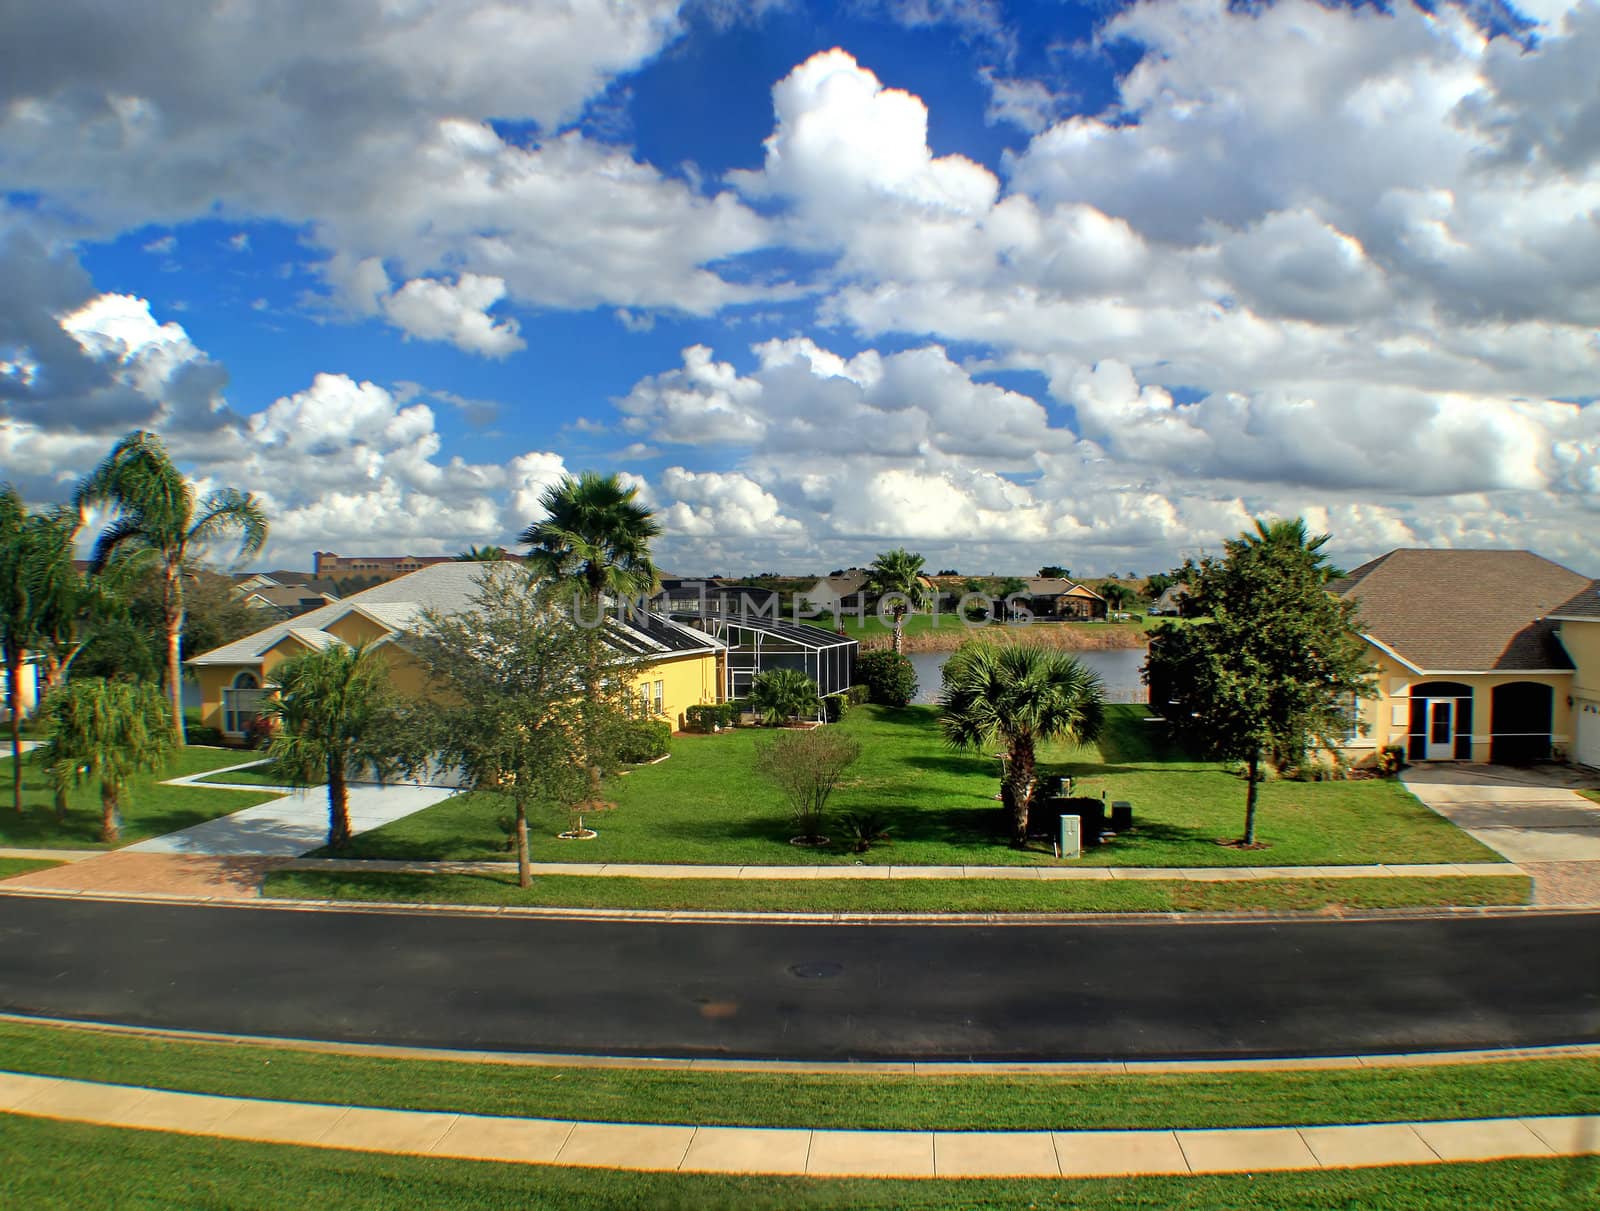 A view of an estate in Florida.